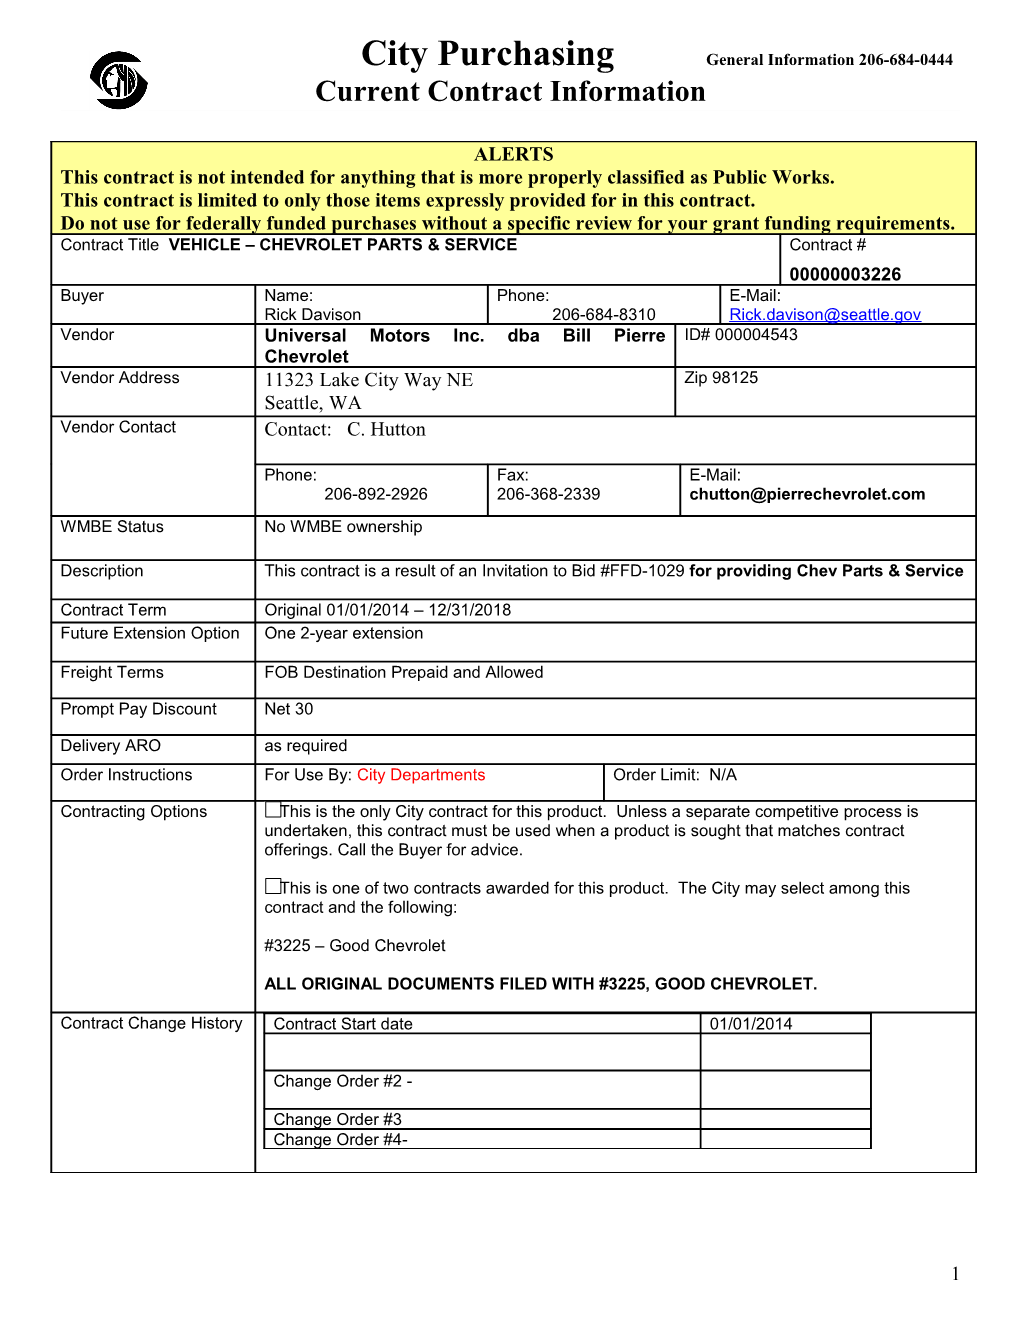 Current Contract Information Form s34